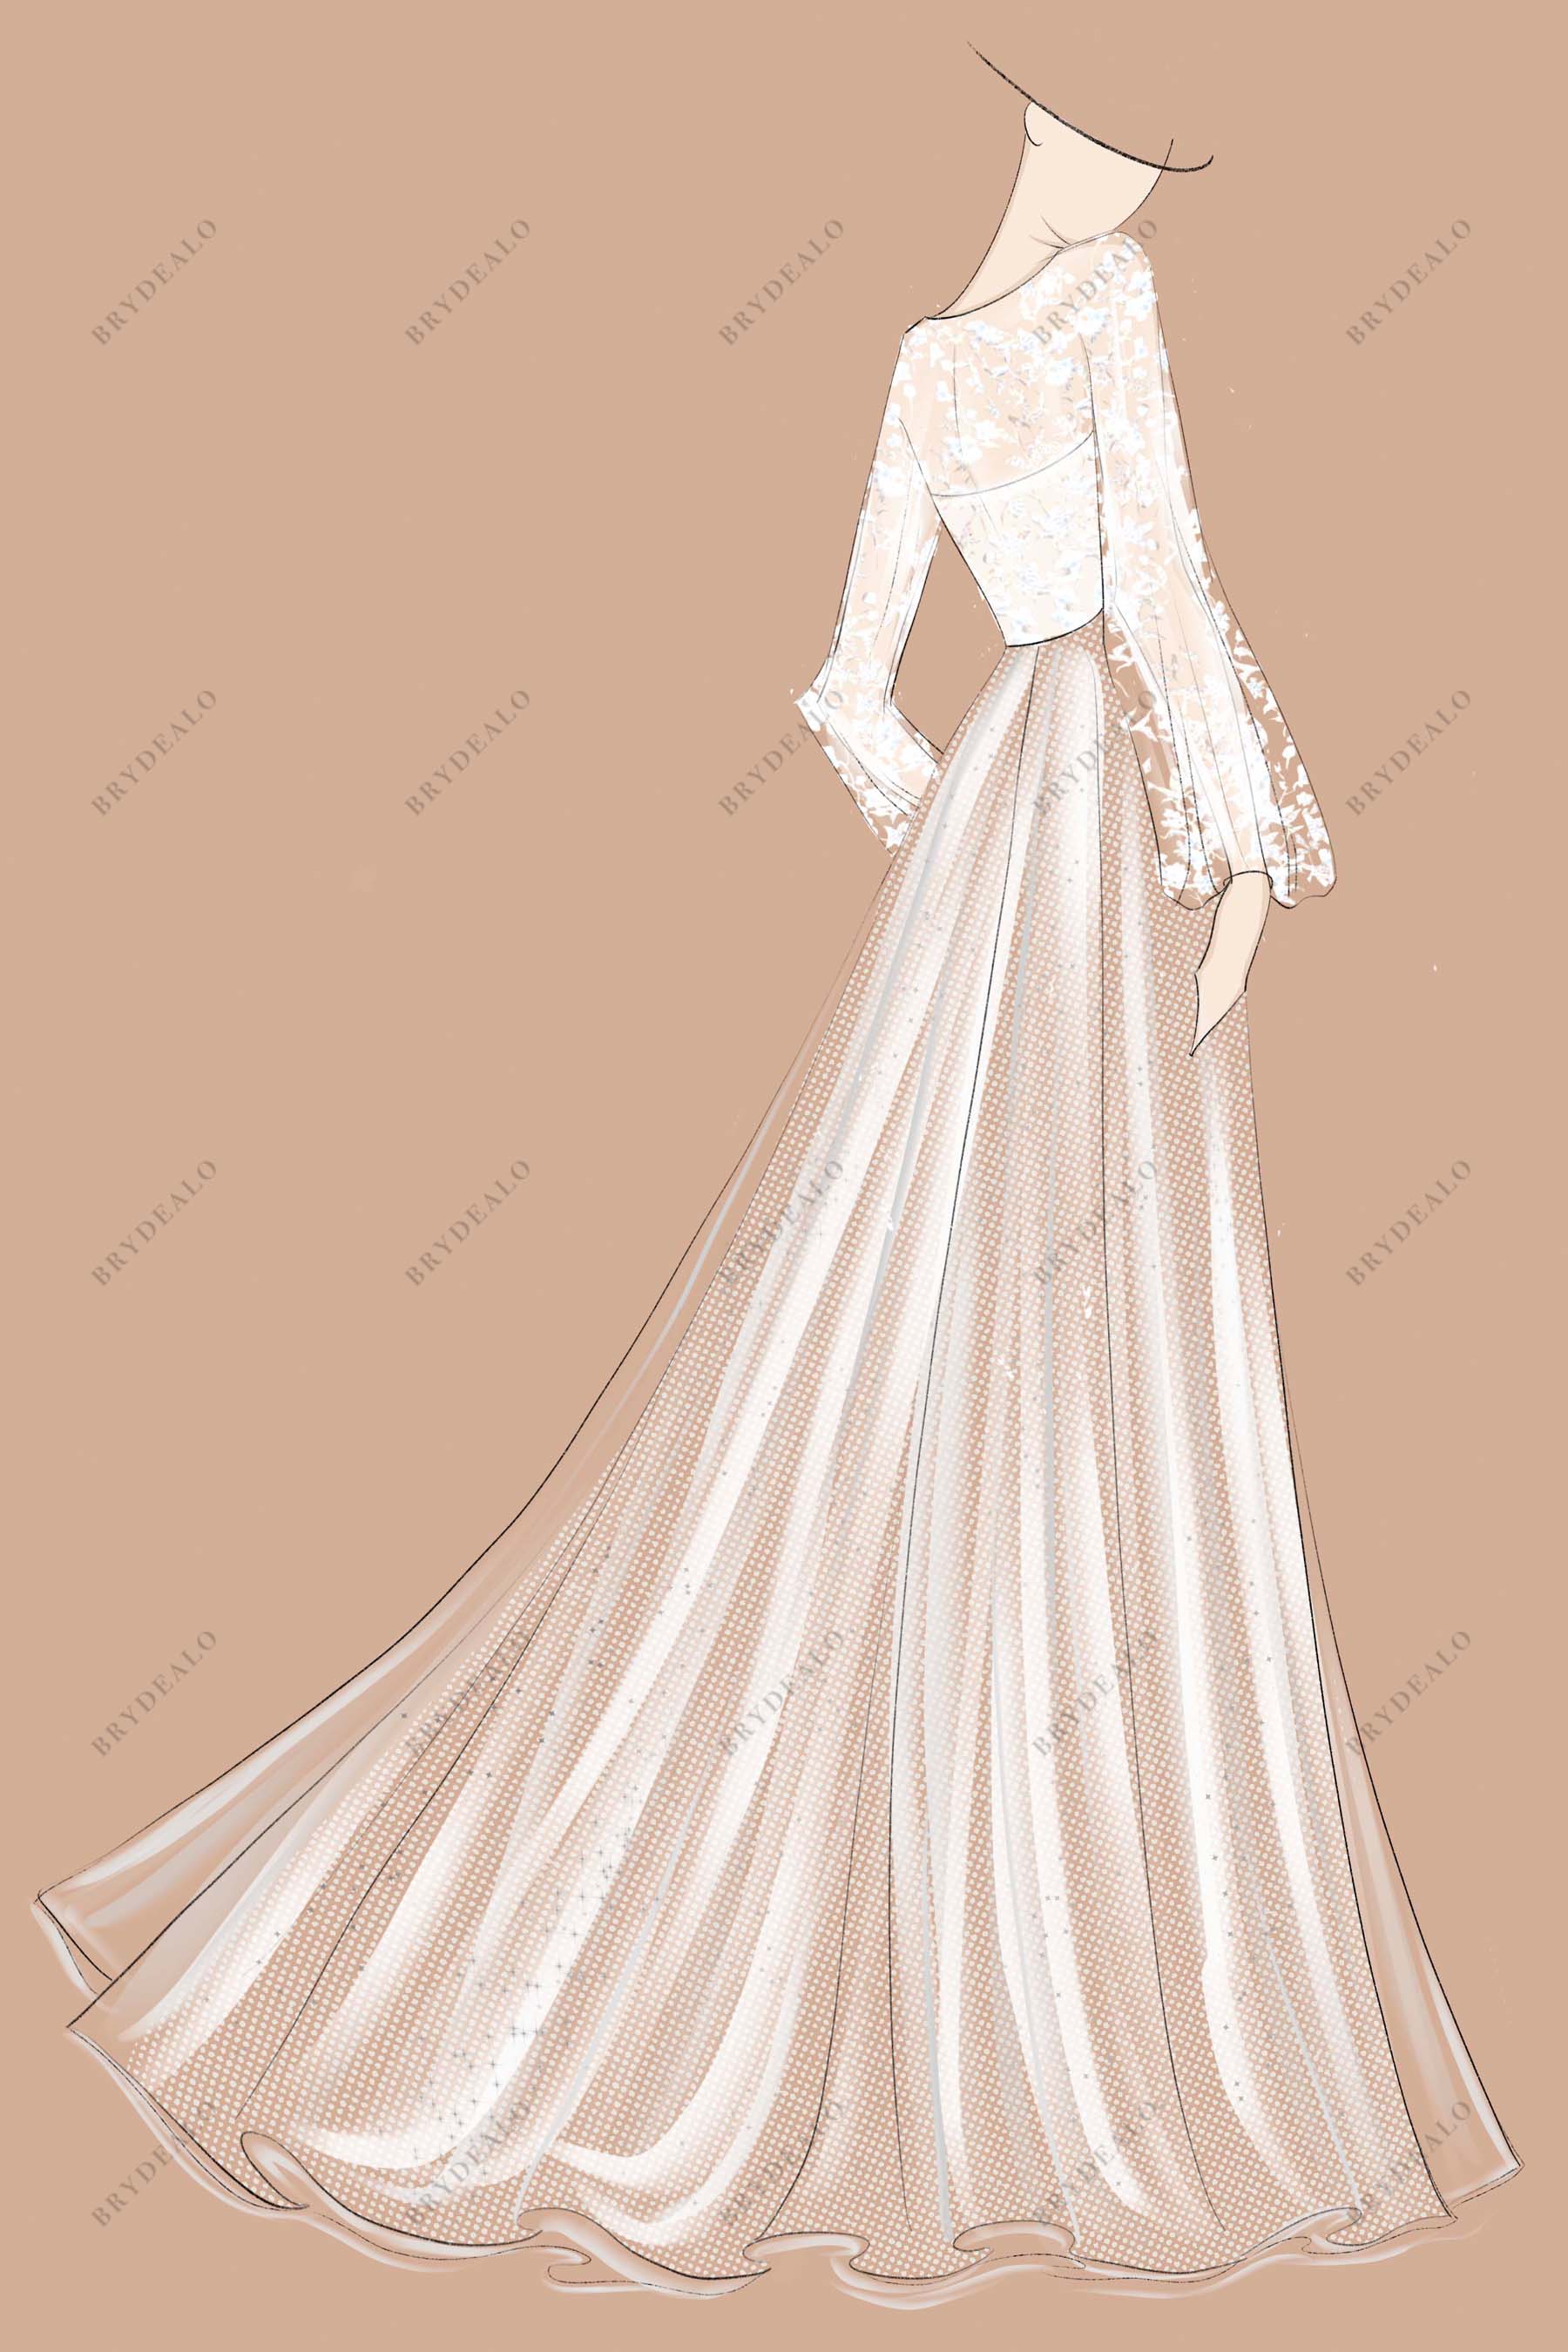 Lace Puffy Sleeves A-line Spring Bridal Dress Sketch